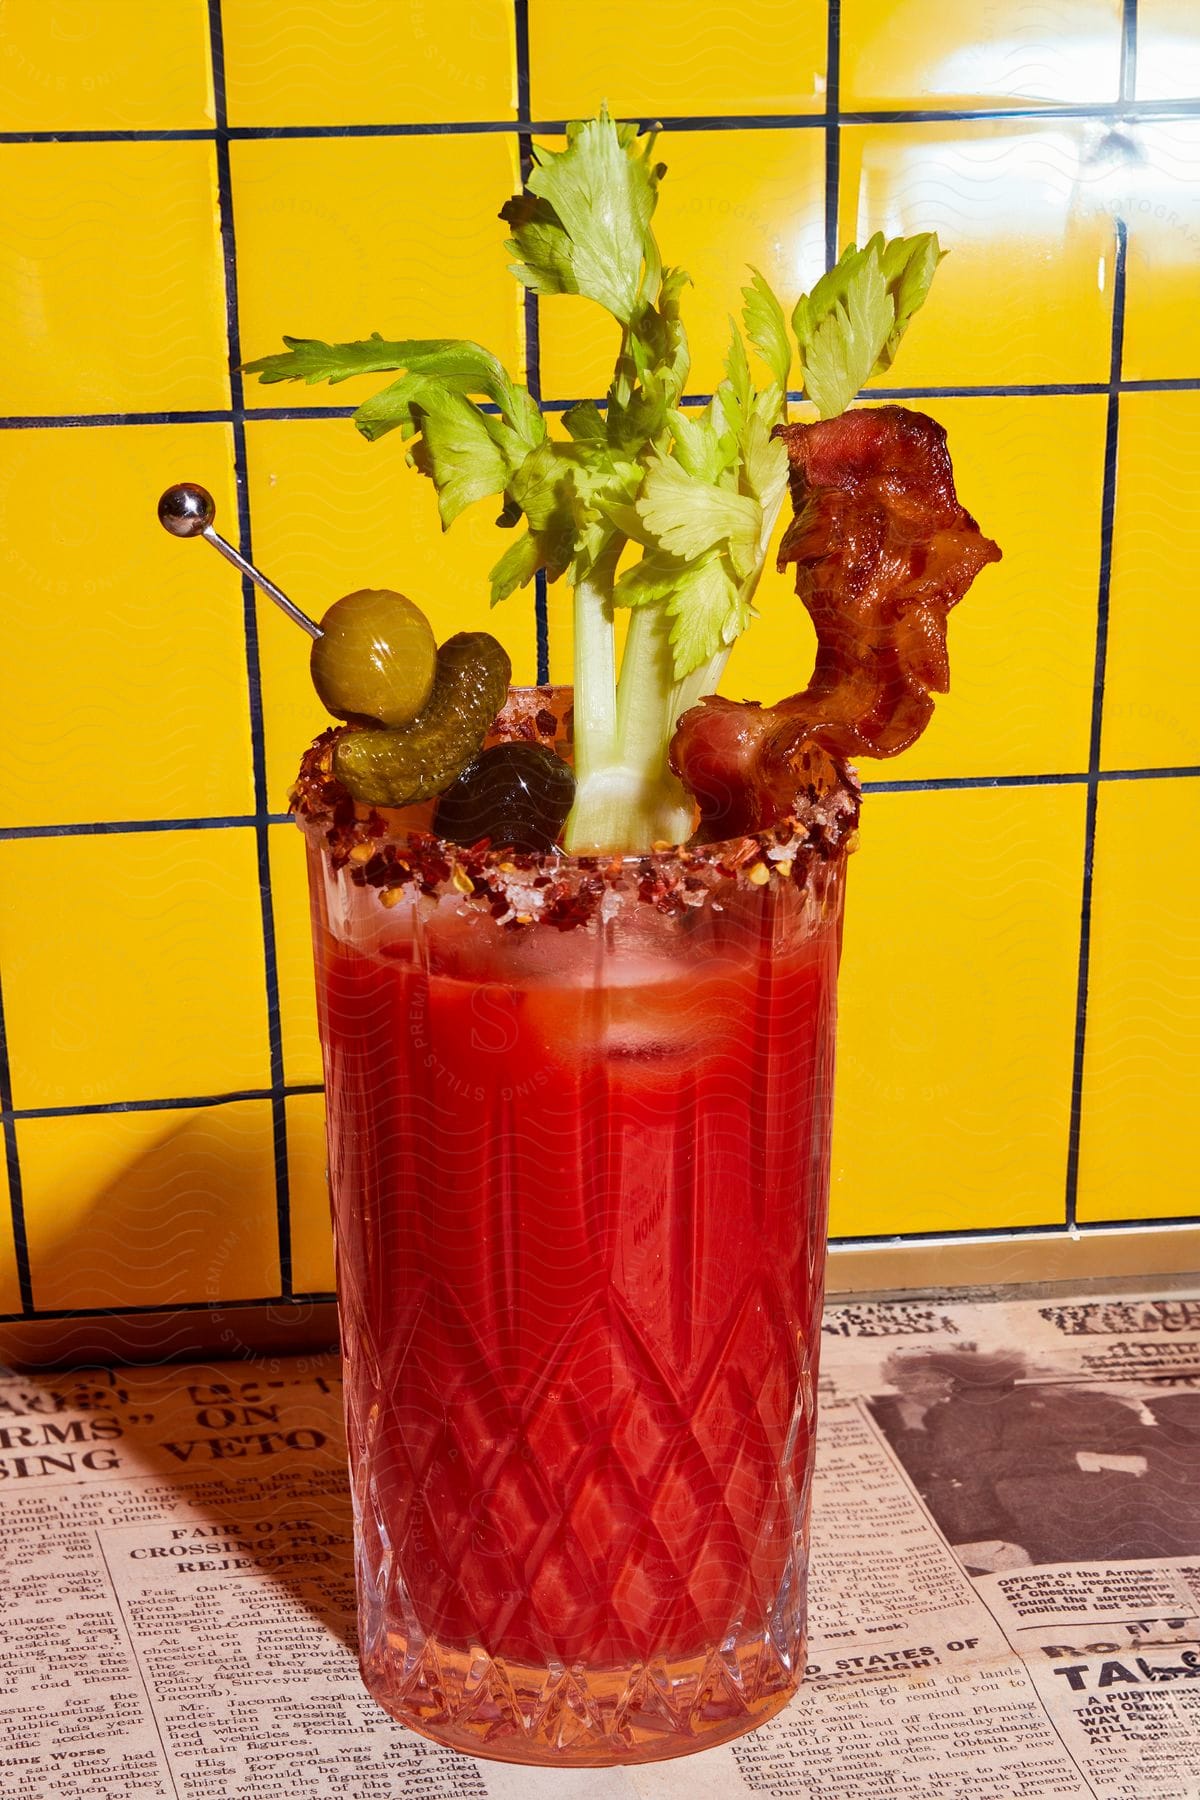 Bacon and vegetables garnish beverage sitting on newspaper near tiled wall.